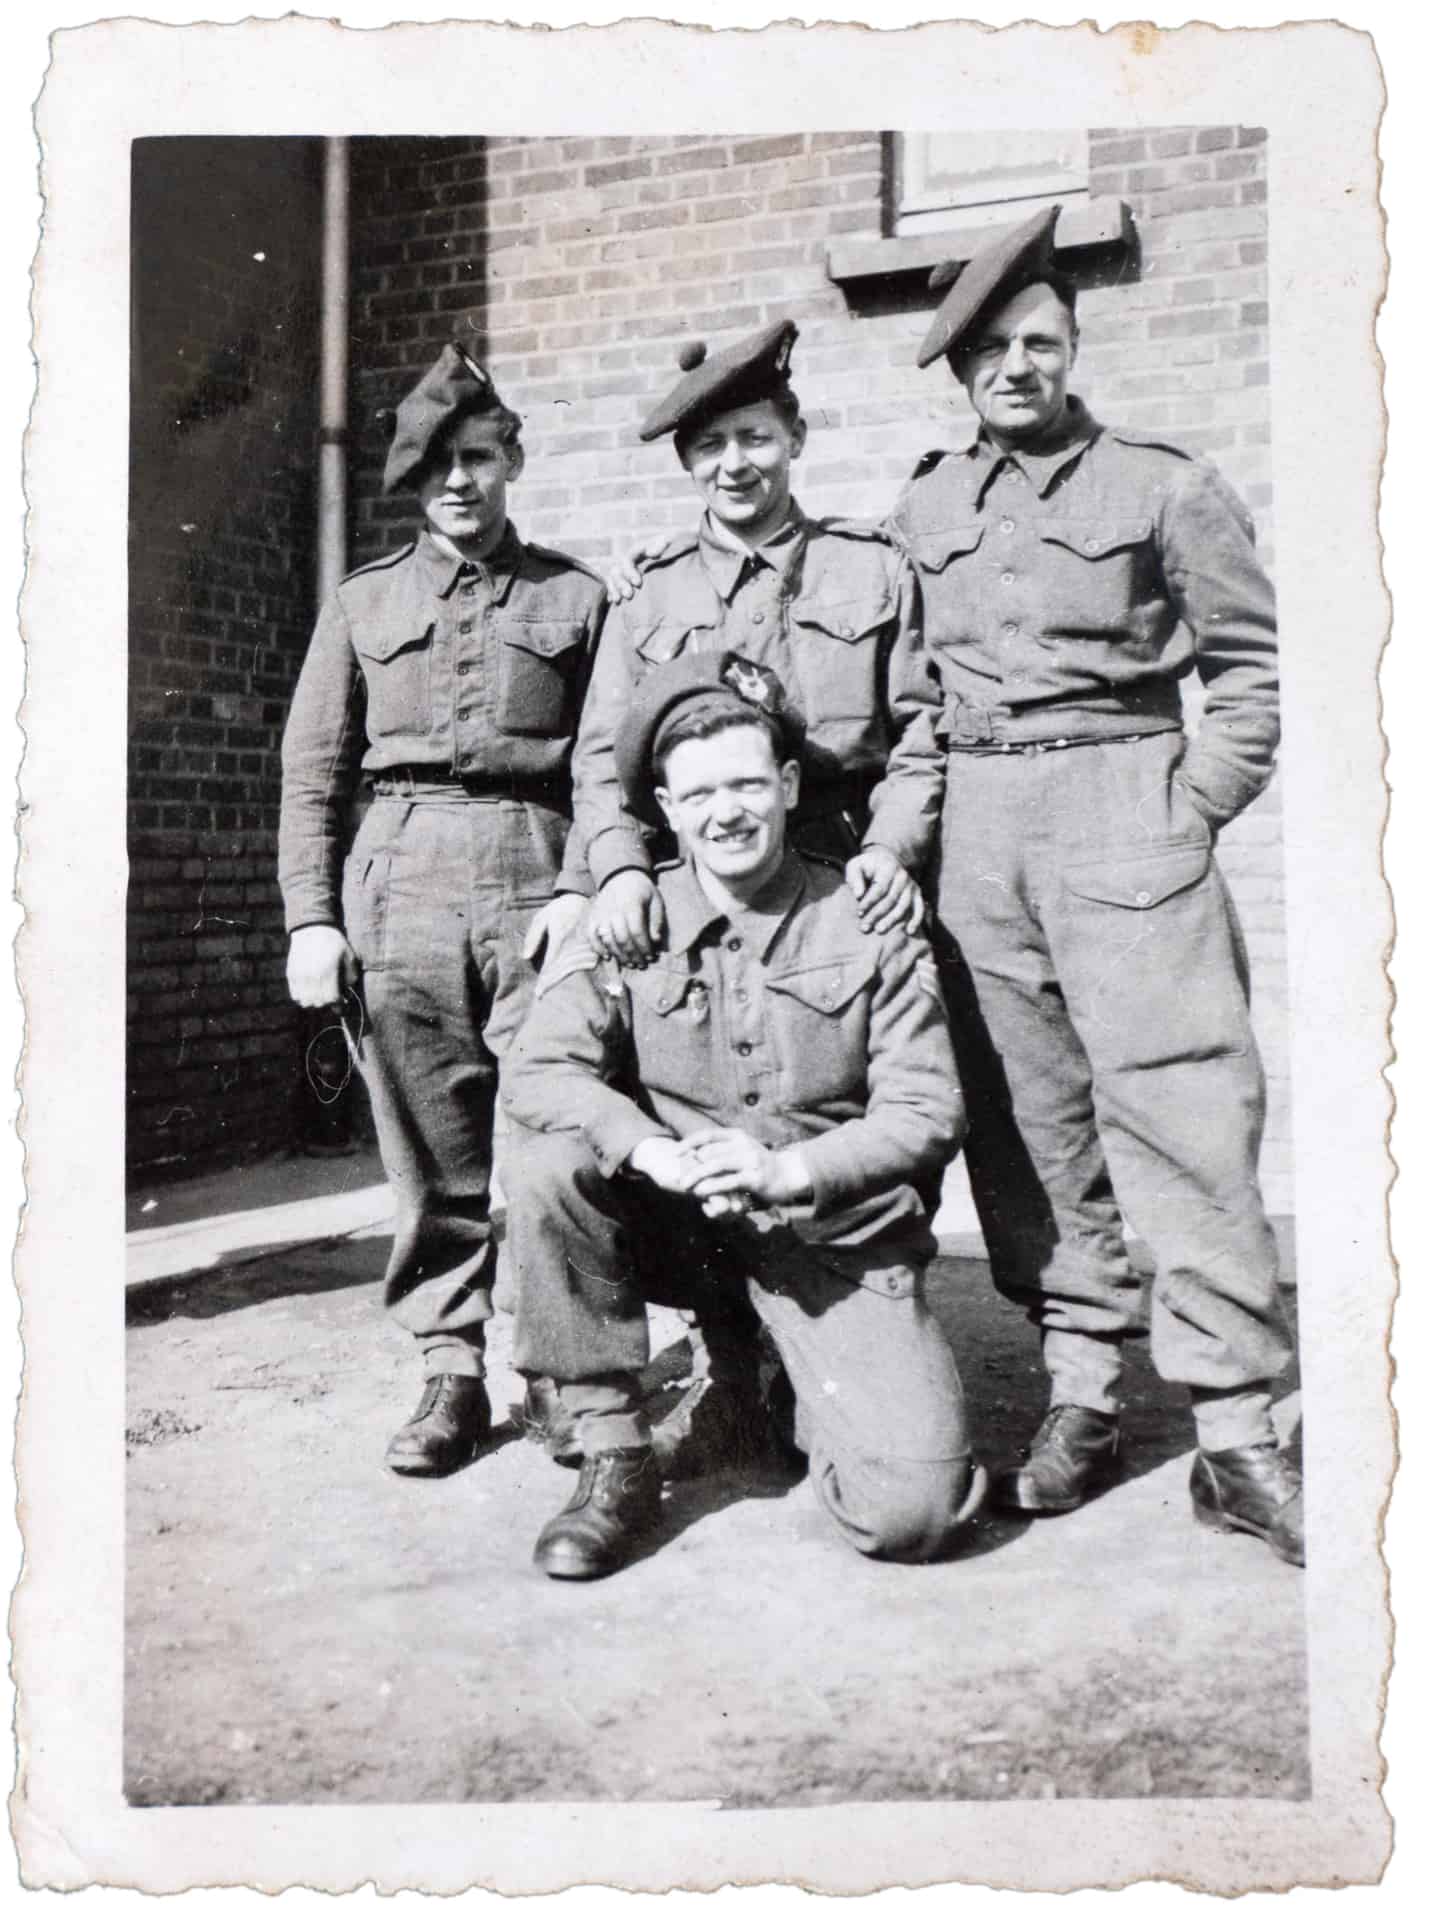 Belgium or Holland late 1944 or early 1945